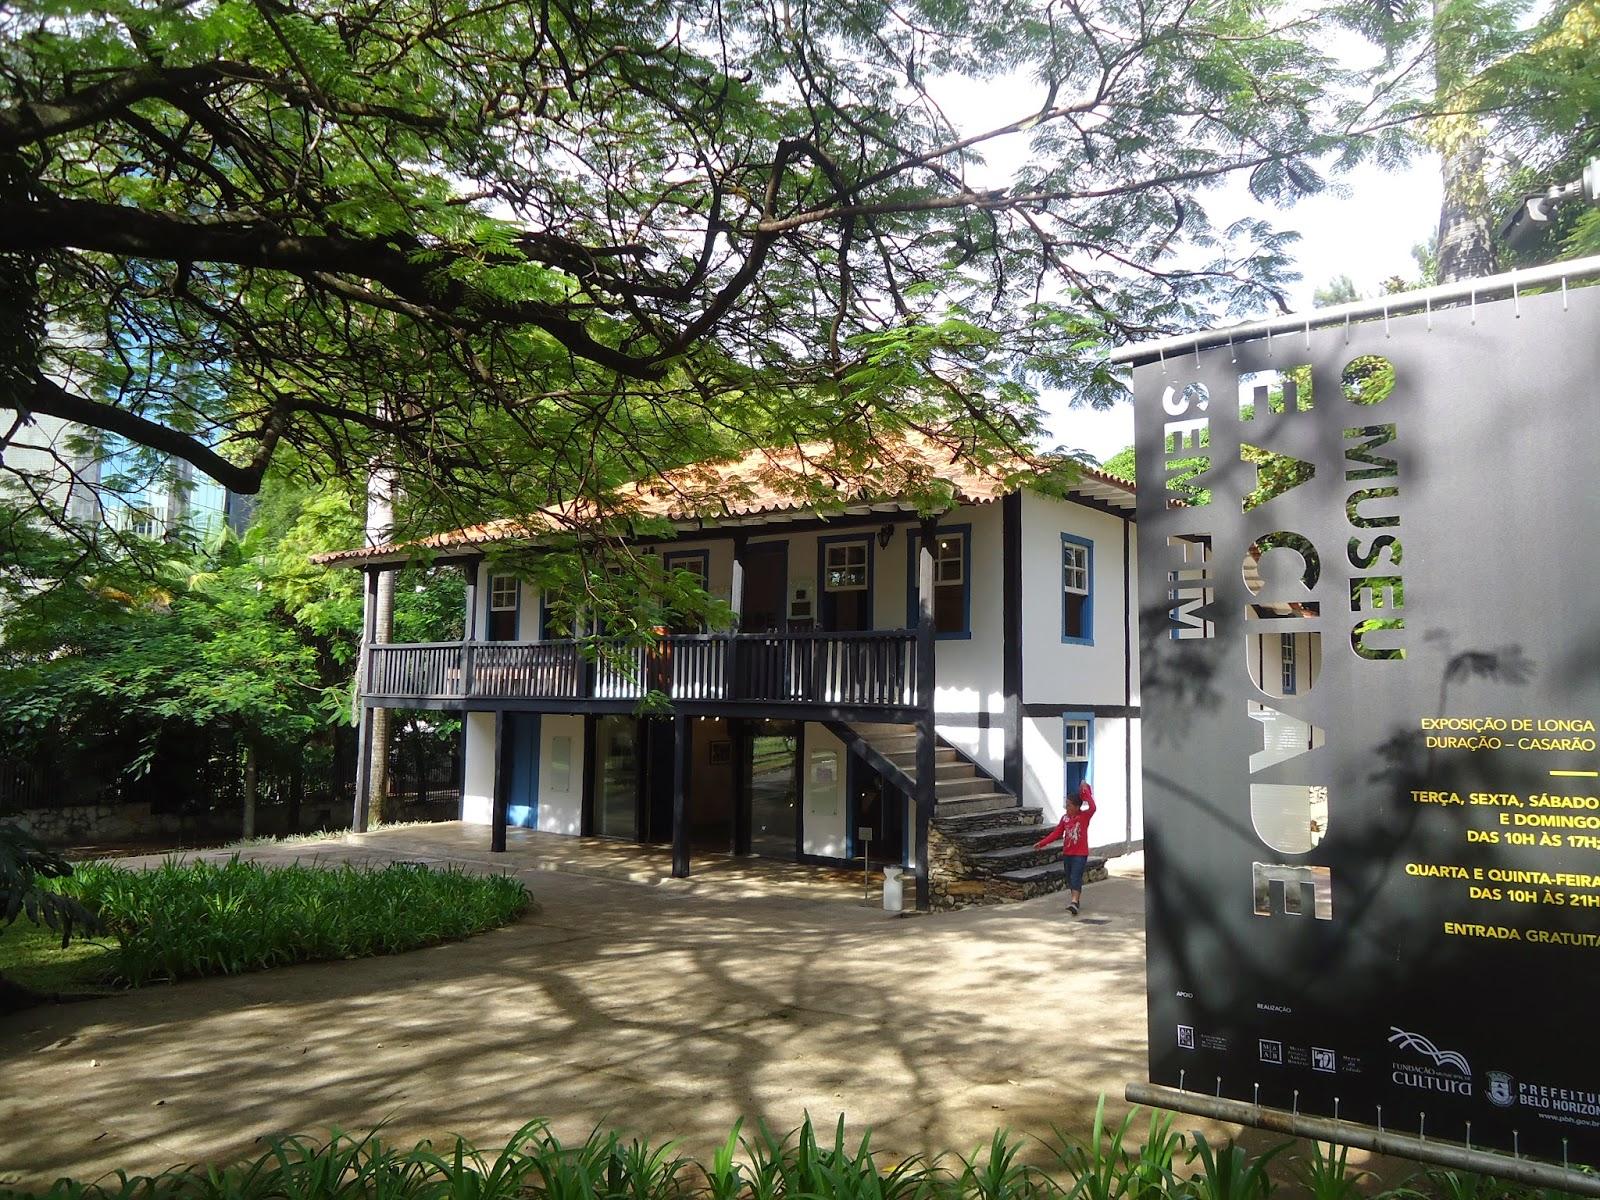 Cover image of this place Abílio Barreto Historic Museum